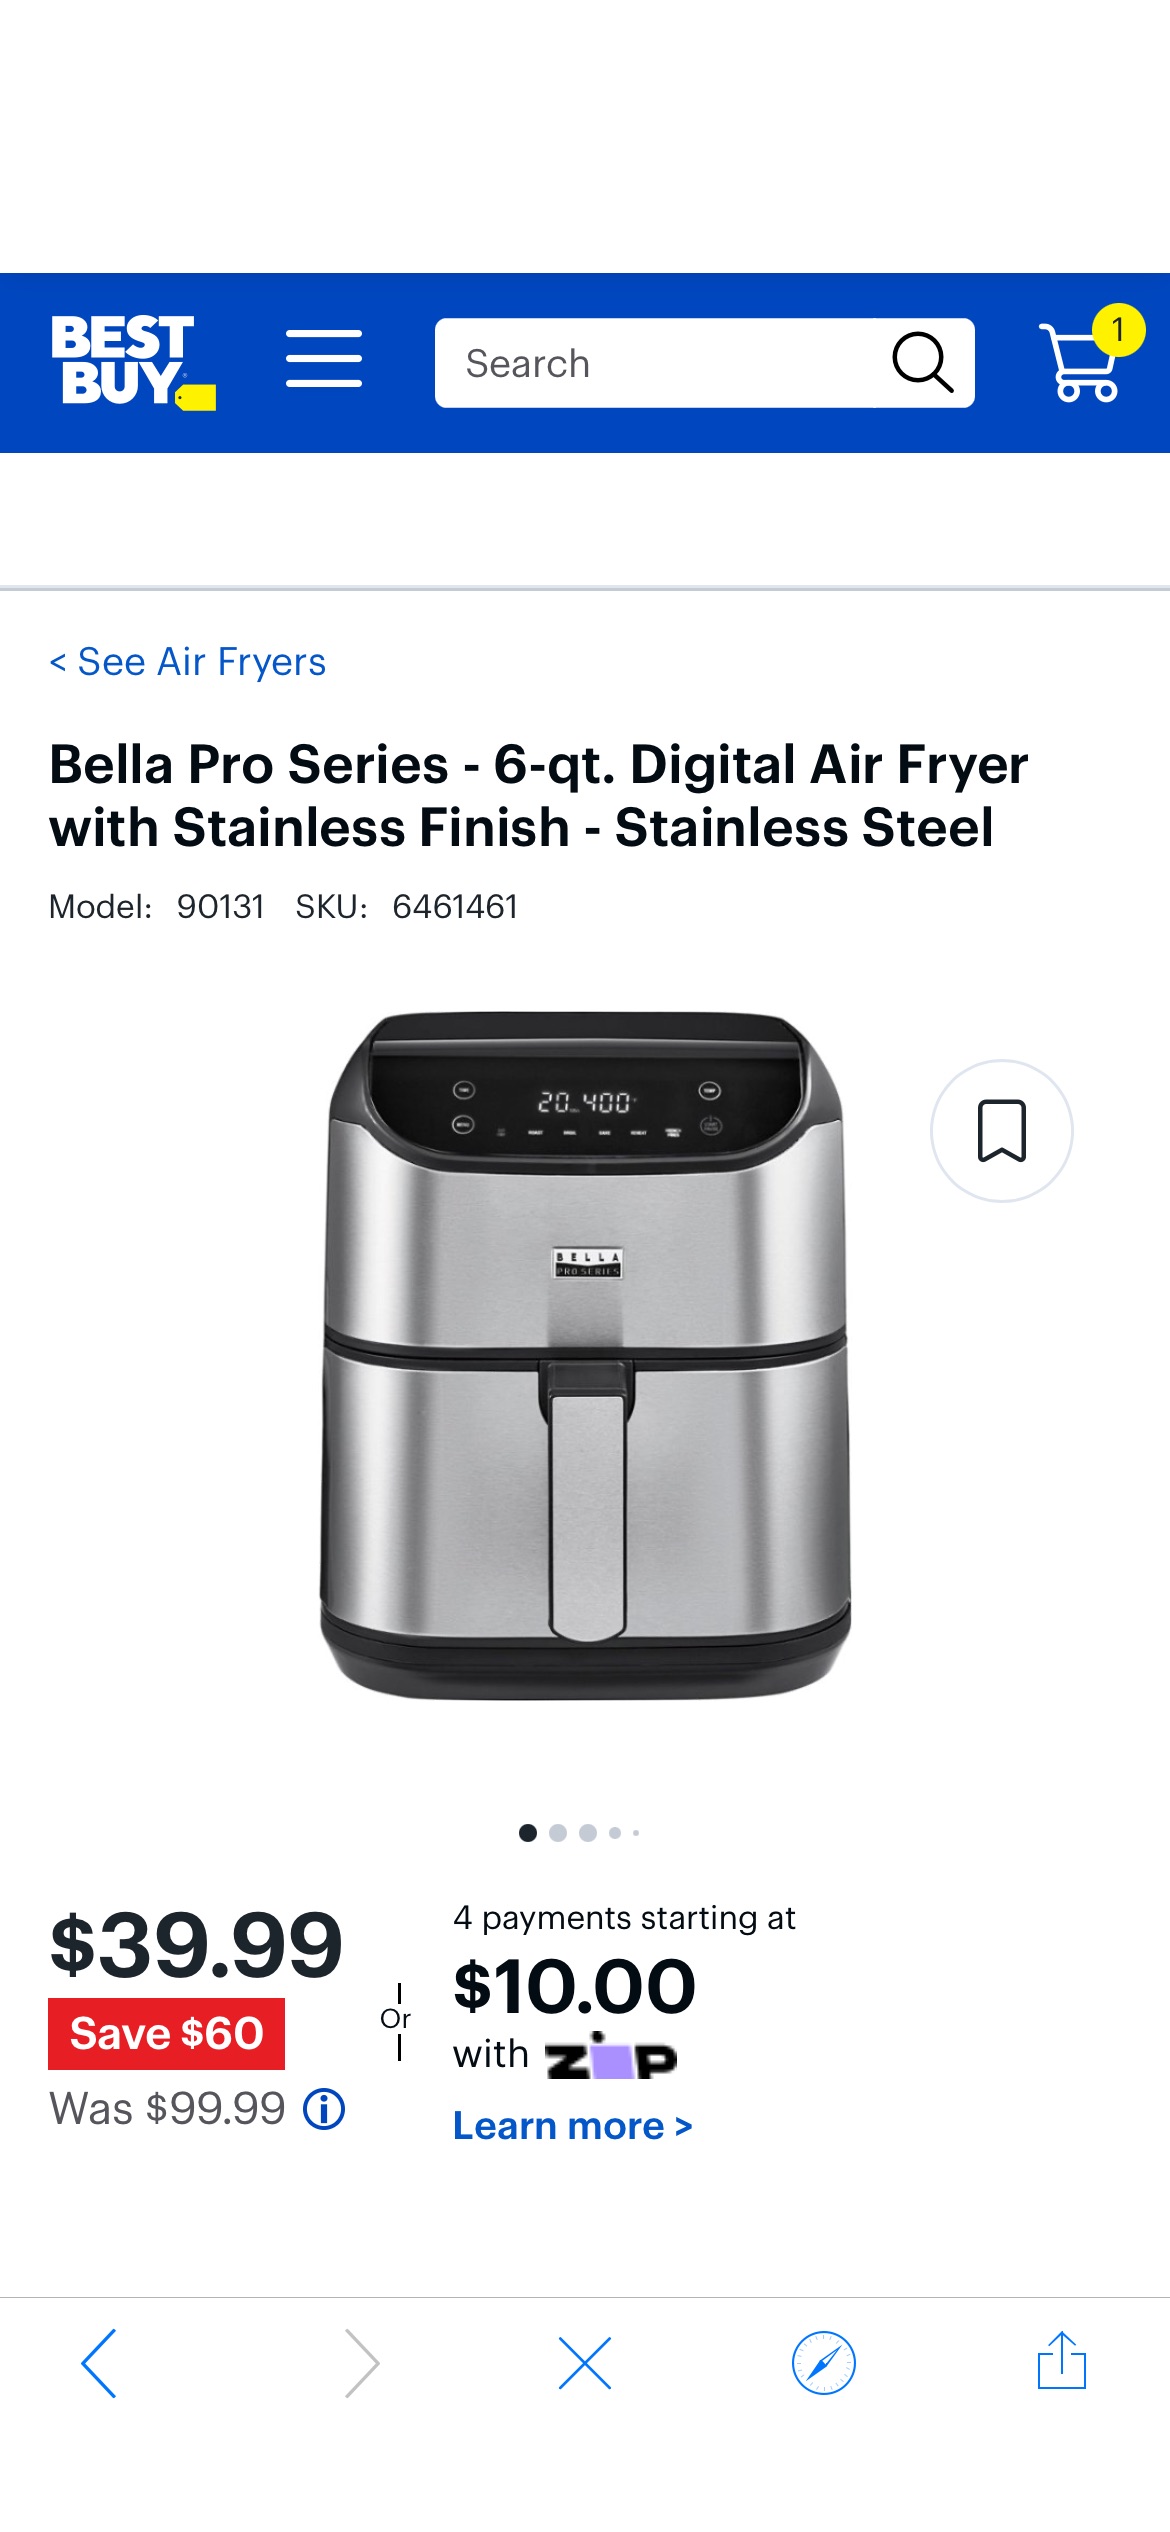 Bella Pro Series 6-qt. Digital Air Fryer with Stainless Finish Stainless Steel 90131 - Best Buy